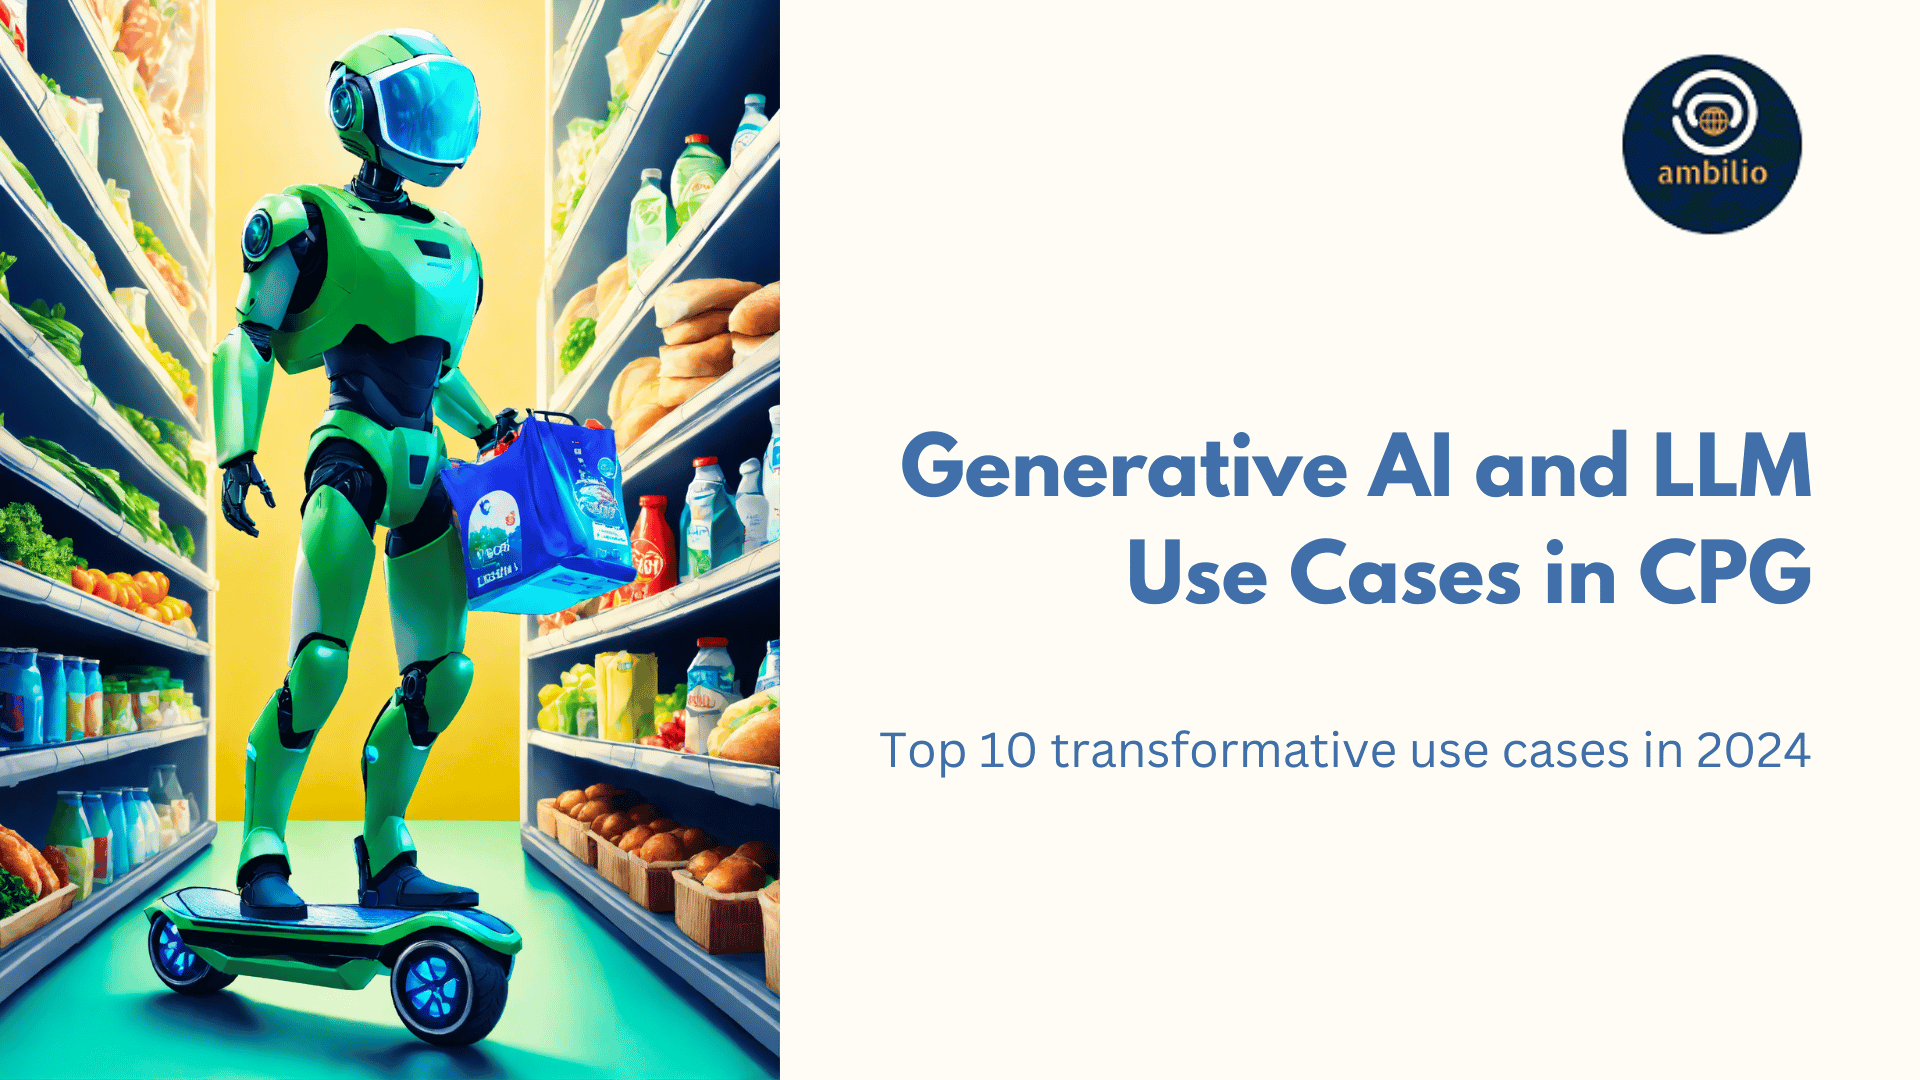 Generative AI and LLM Use Cases in CPG